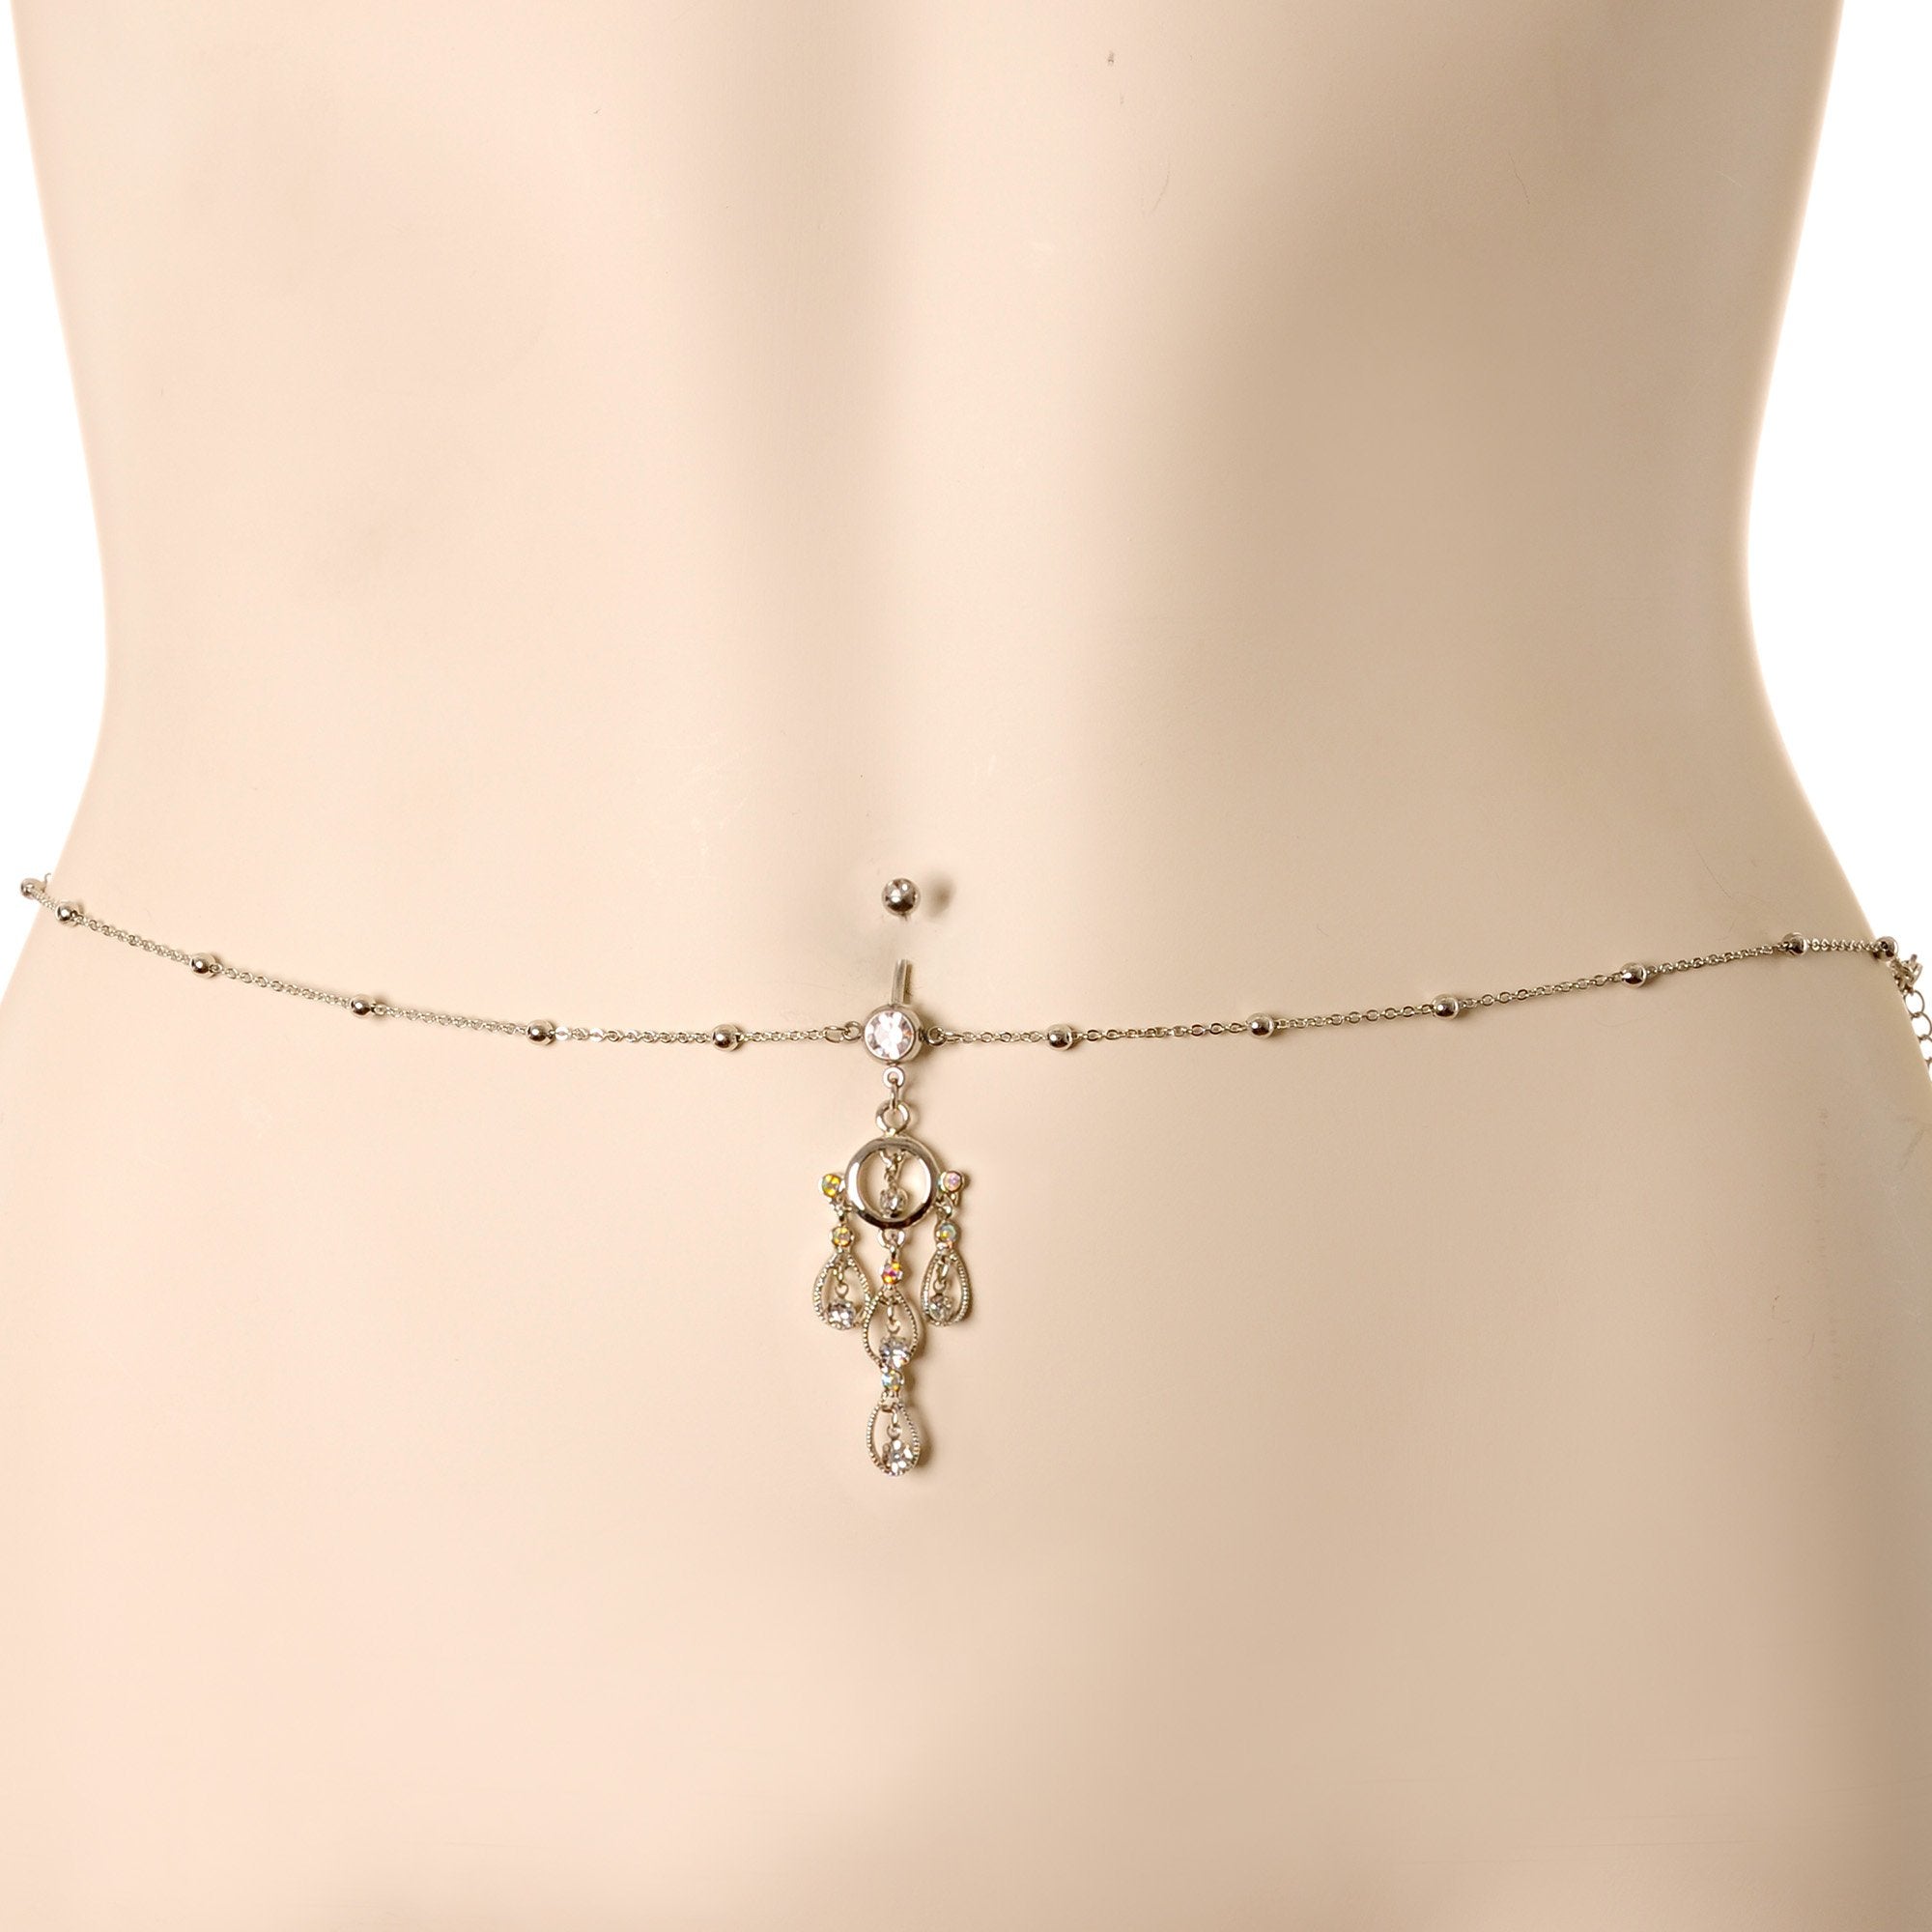 Clear Gem Dancing Queen Chandelier Dangle Belly Ring Belly Chain